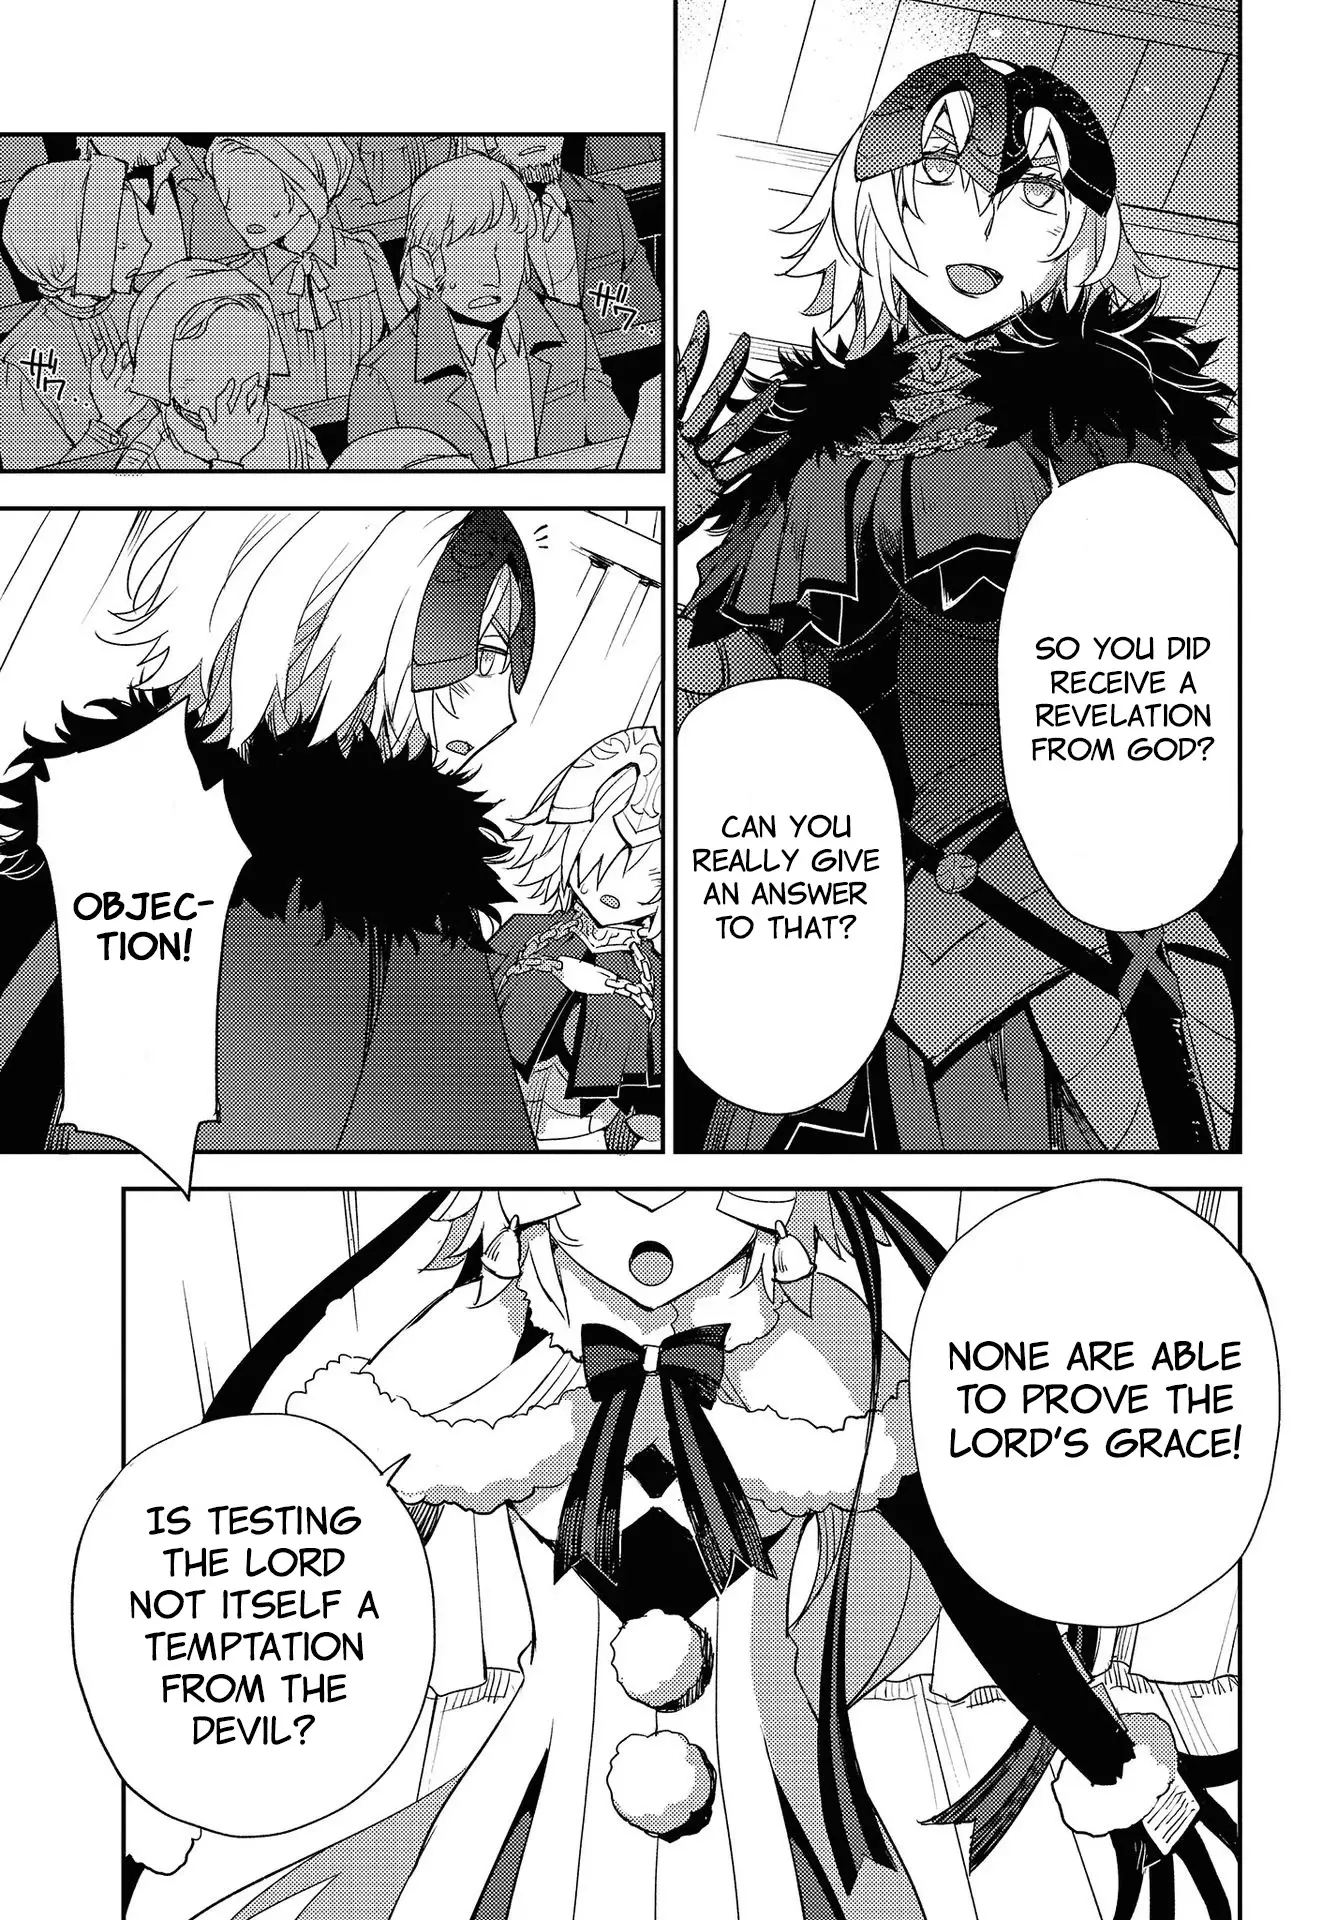 Fate/grand Order: Epic Of Remnant - Subspecies Singularity Iv: Taboo Advent Salem: Salem Of Heresy - 13 page 20